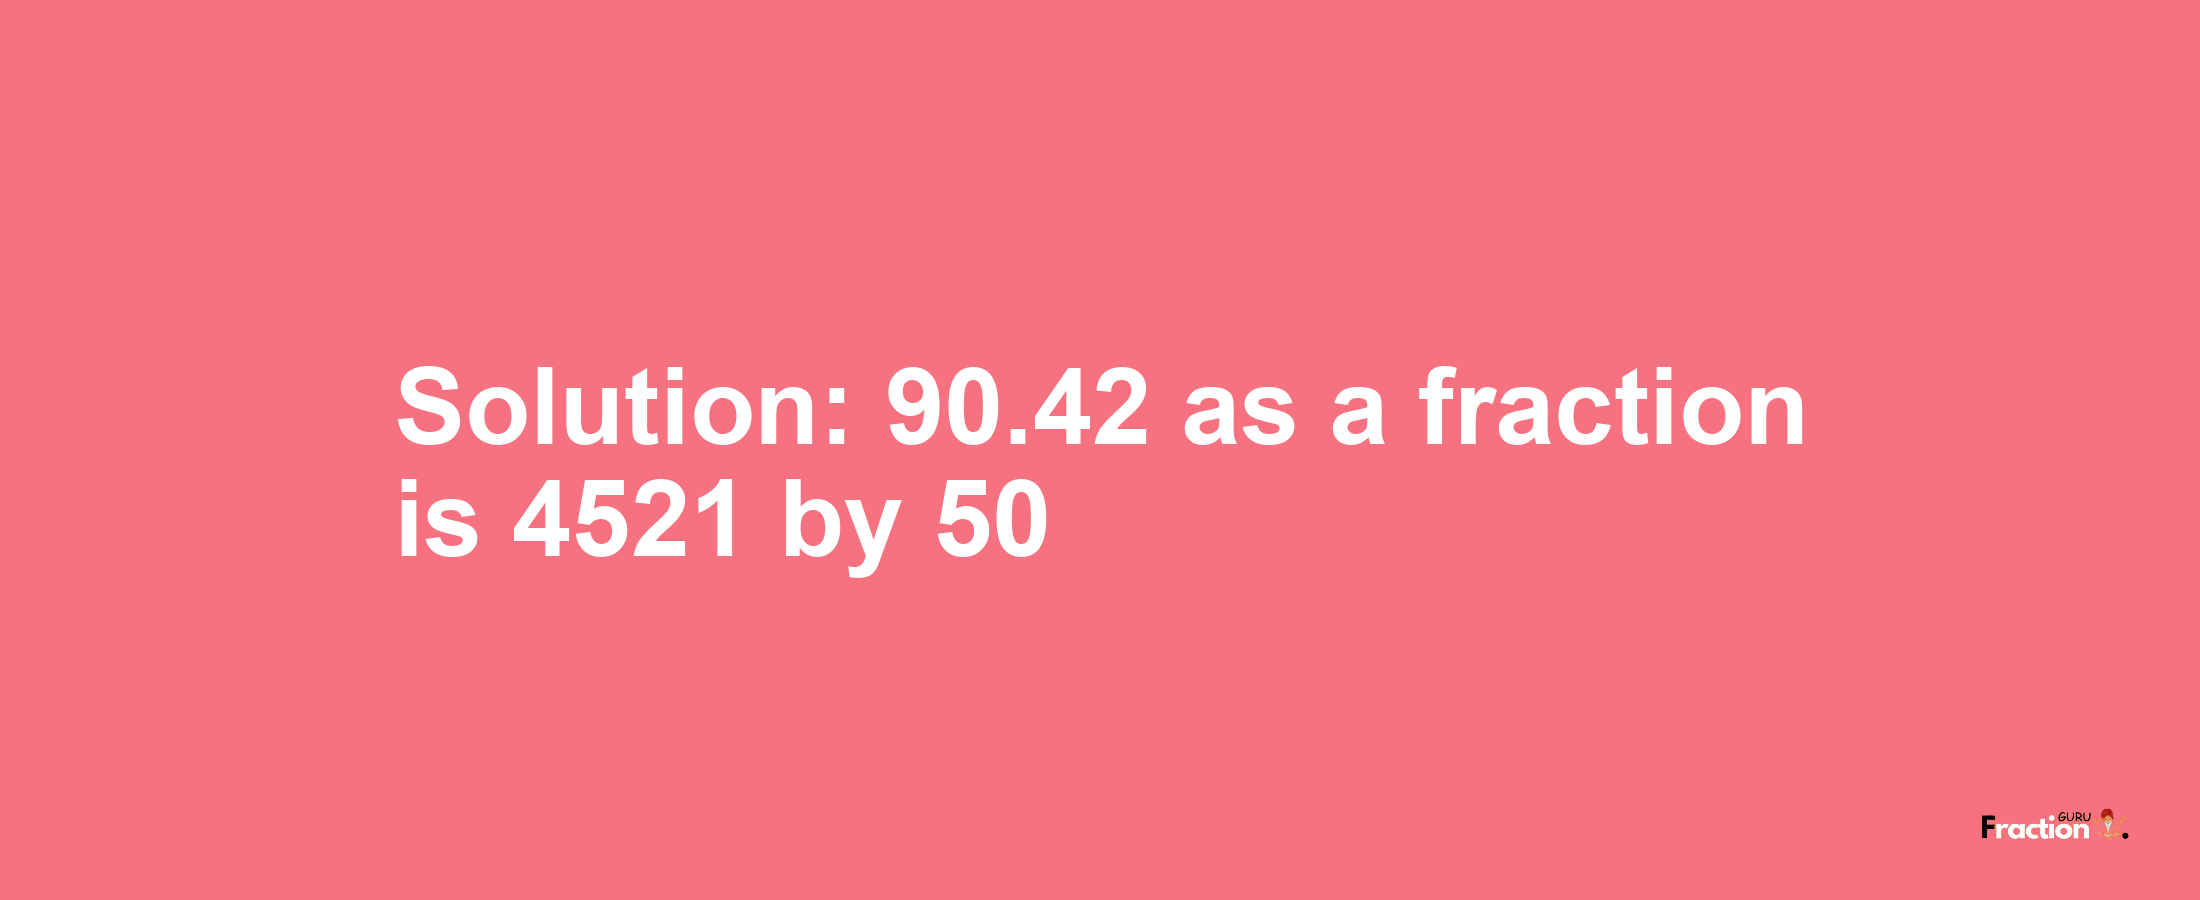 Solution:90.42 as a fraction is 4521/50